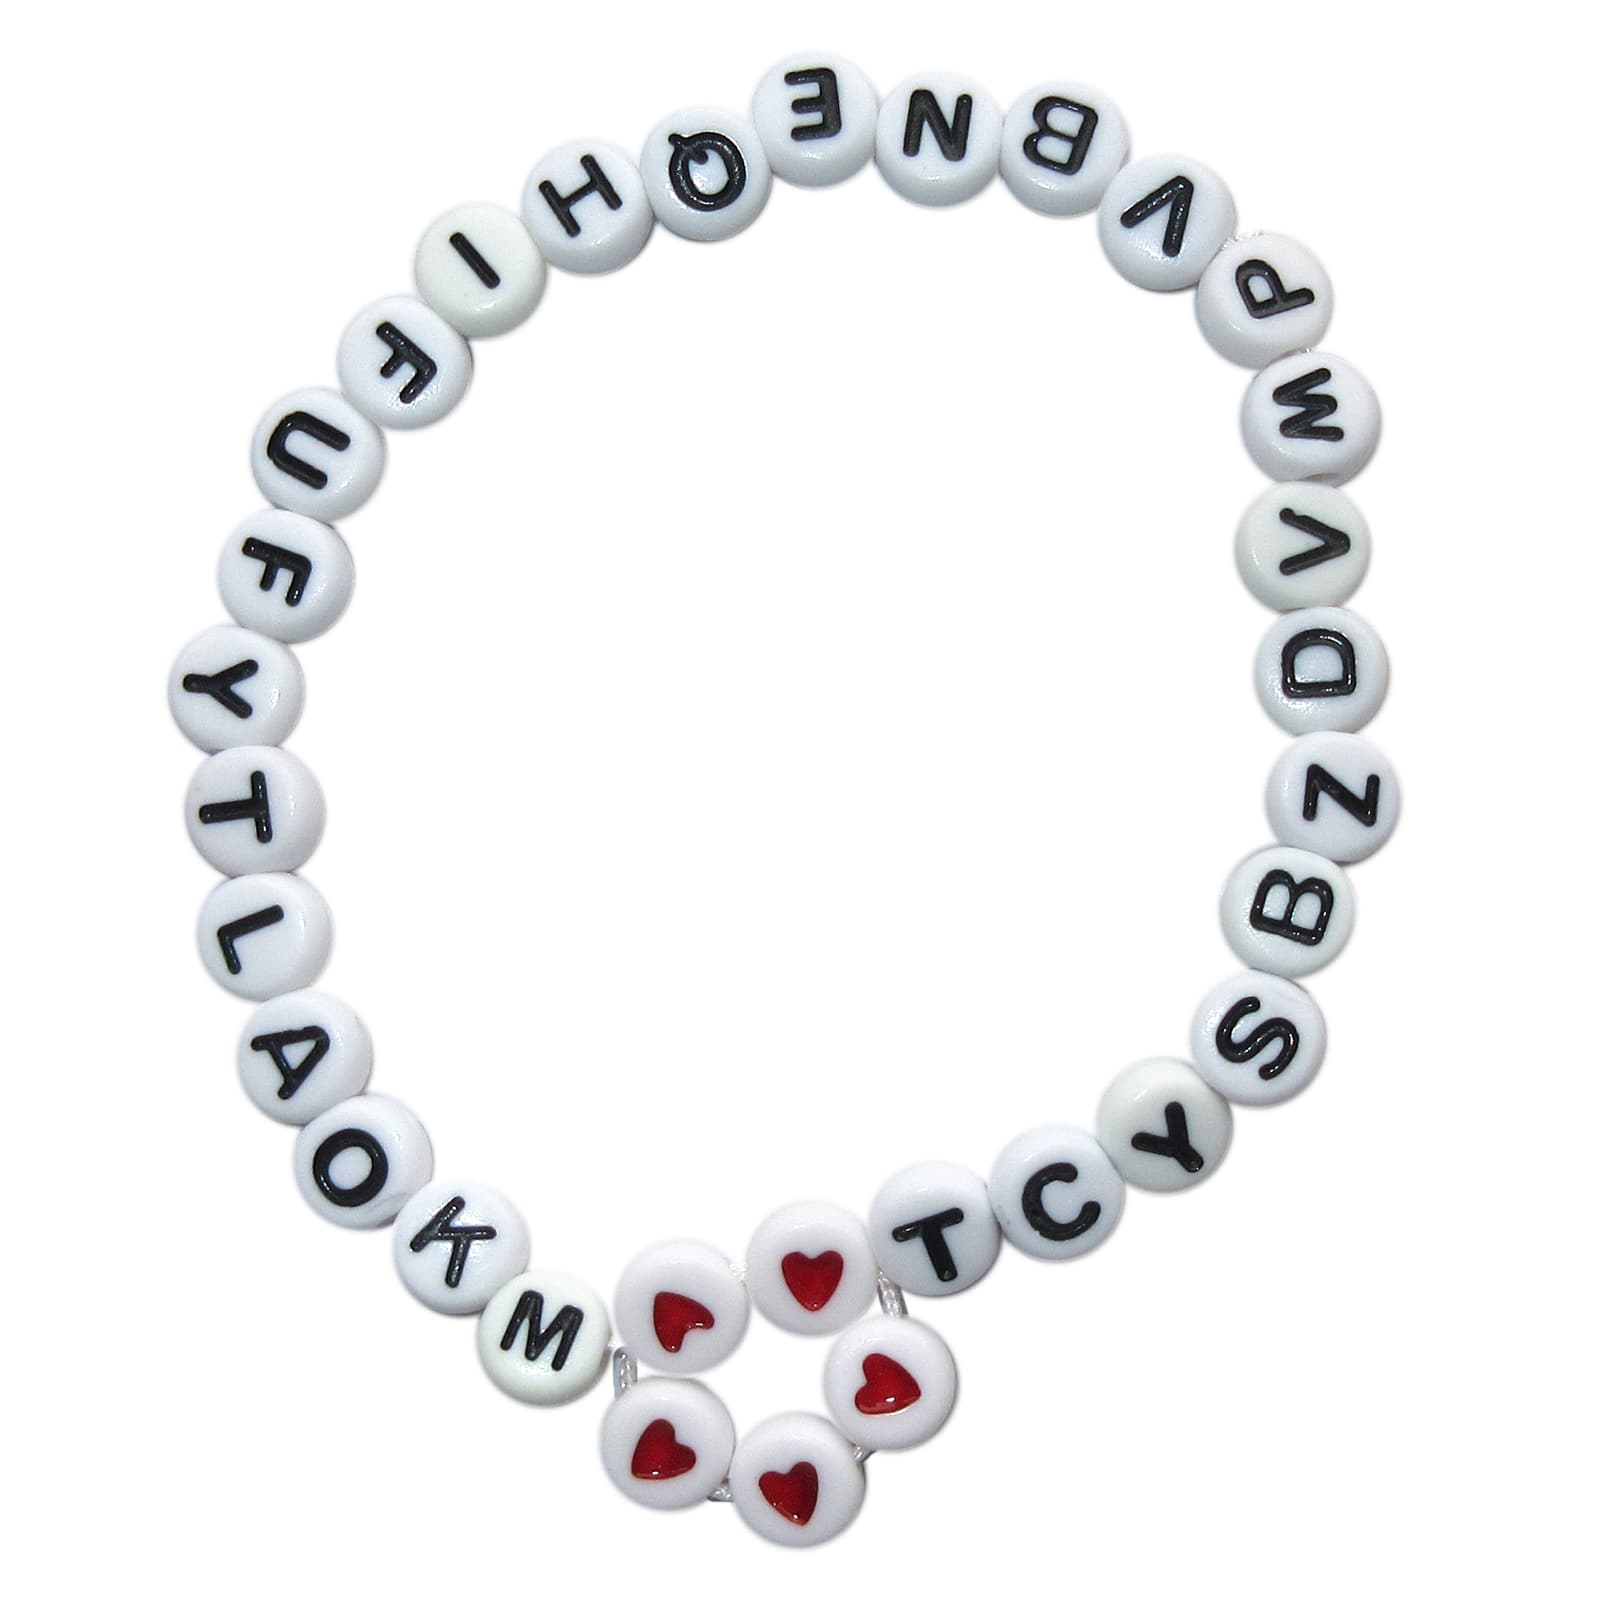 White Circular Number Beads by Creatology | Michaels Kids